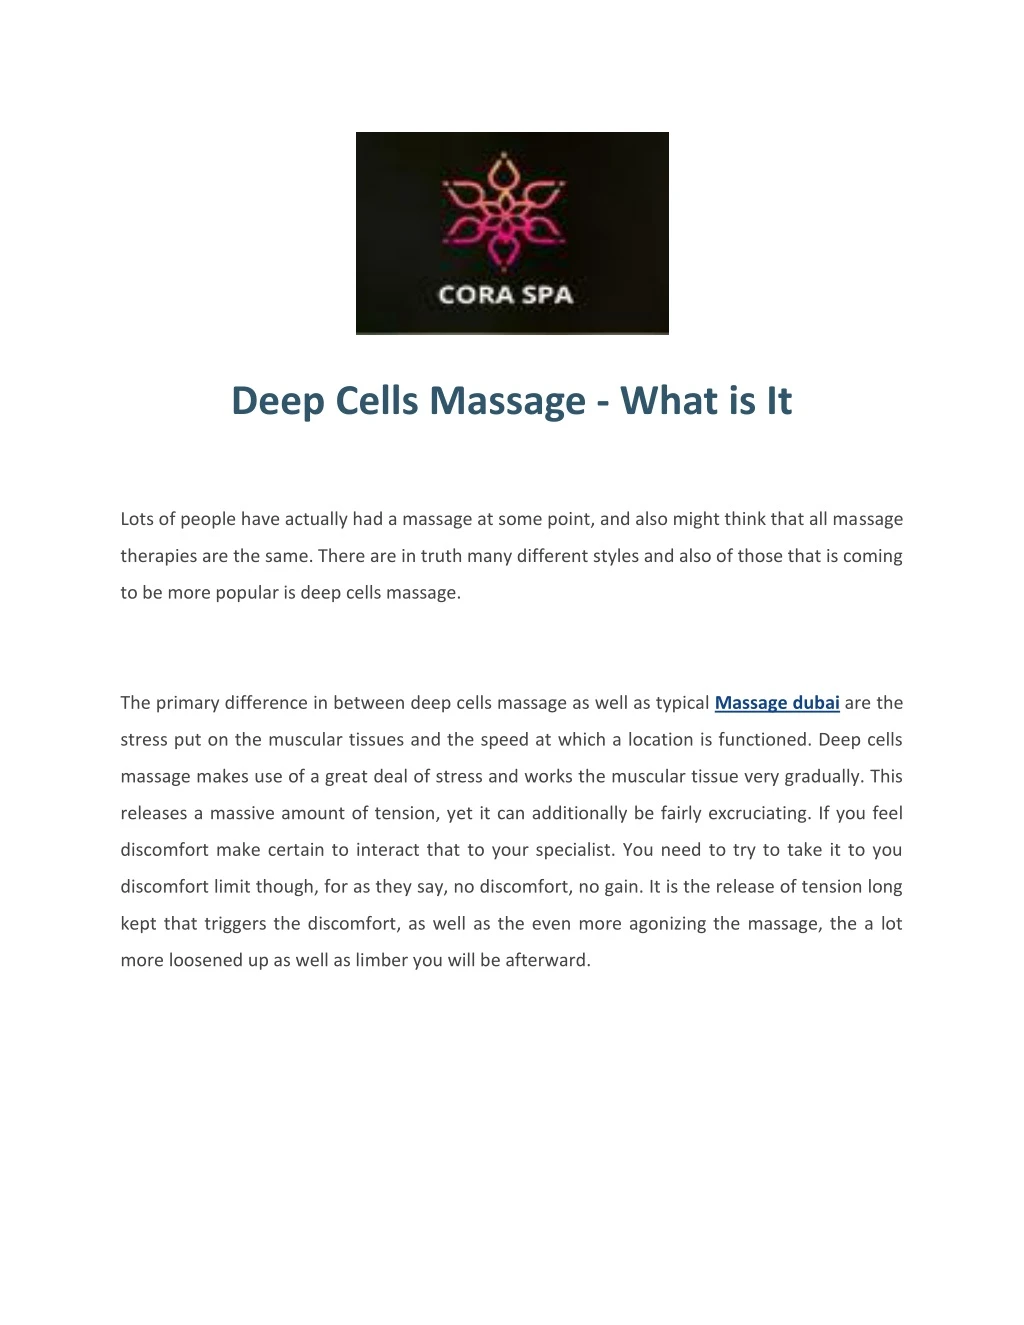 deep cells massage what is it